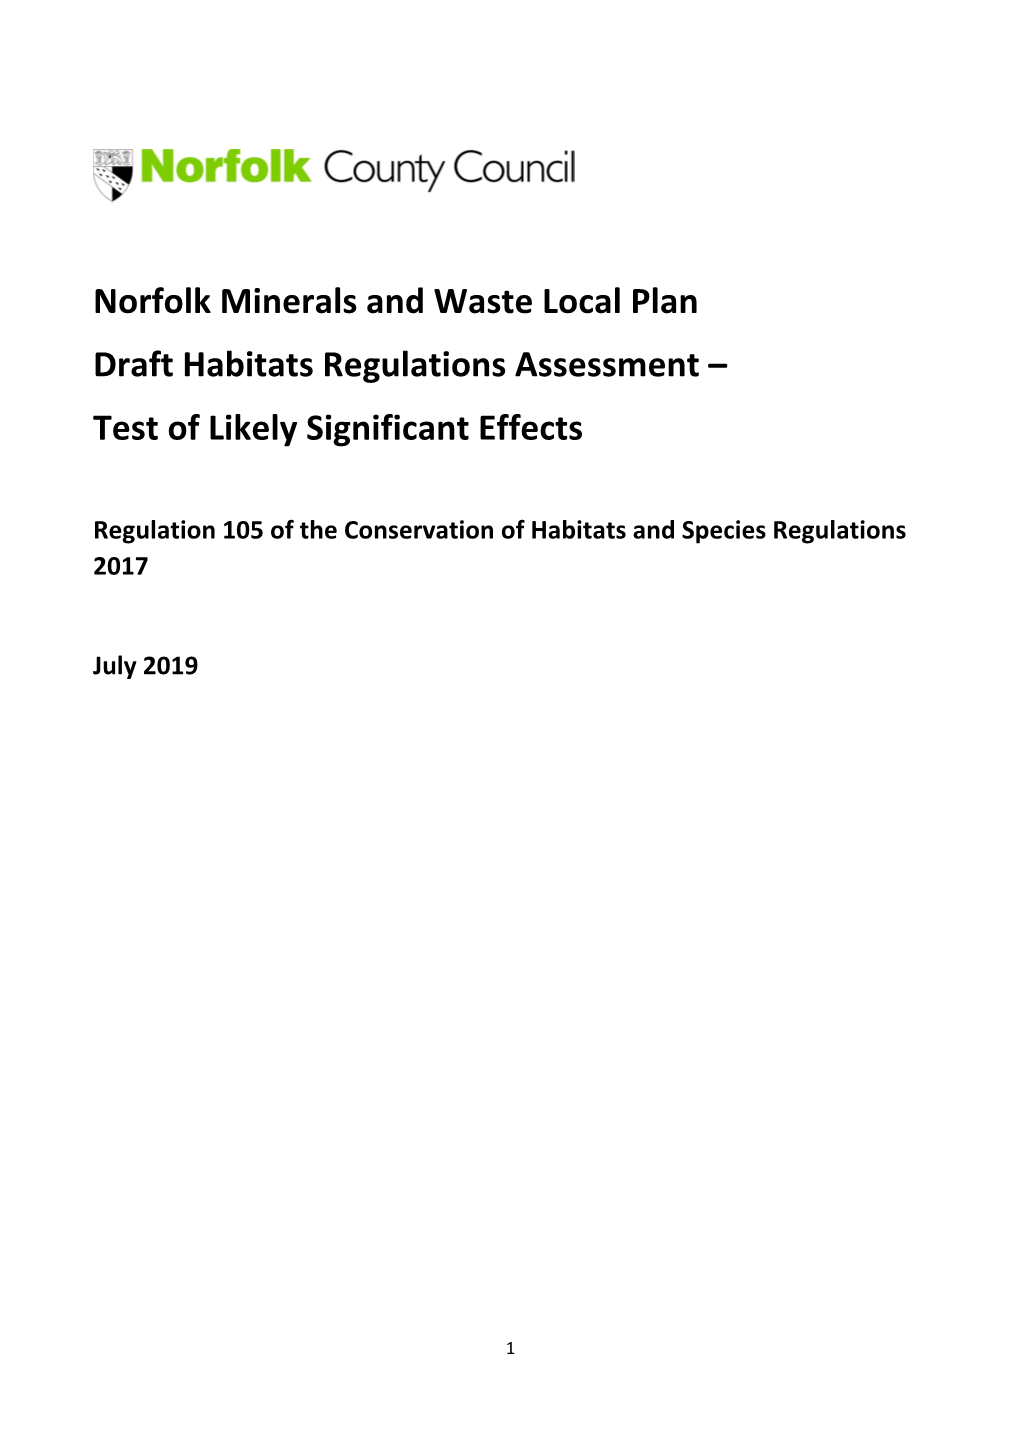 Norfolk Minerals and Waste Local Plan Draft Habitats Regulations Assessment – Test of Likely Significant Effects